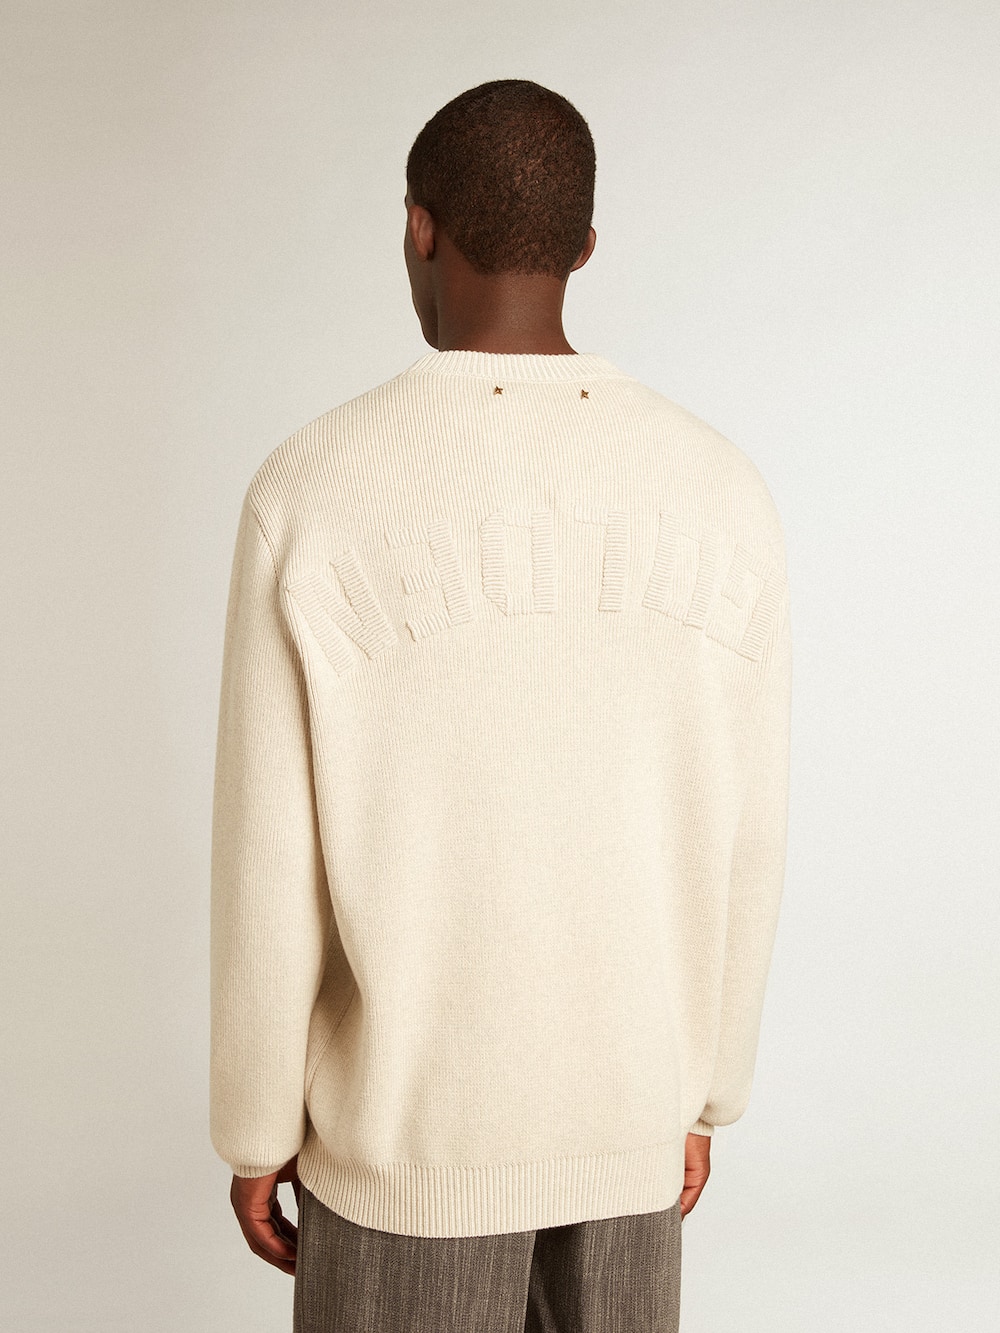 Golden Goose - Men’s round-neck sweater in panama-colored cotton with logo on the back  in 